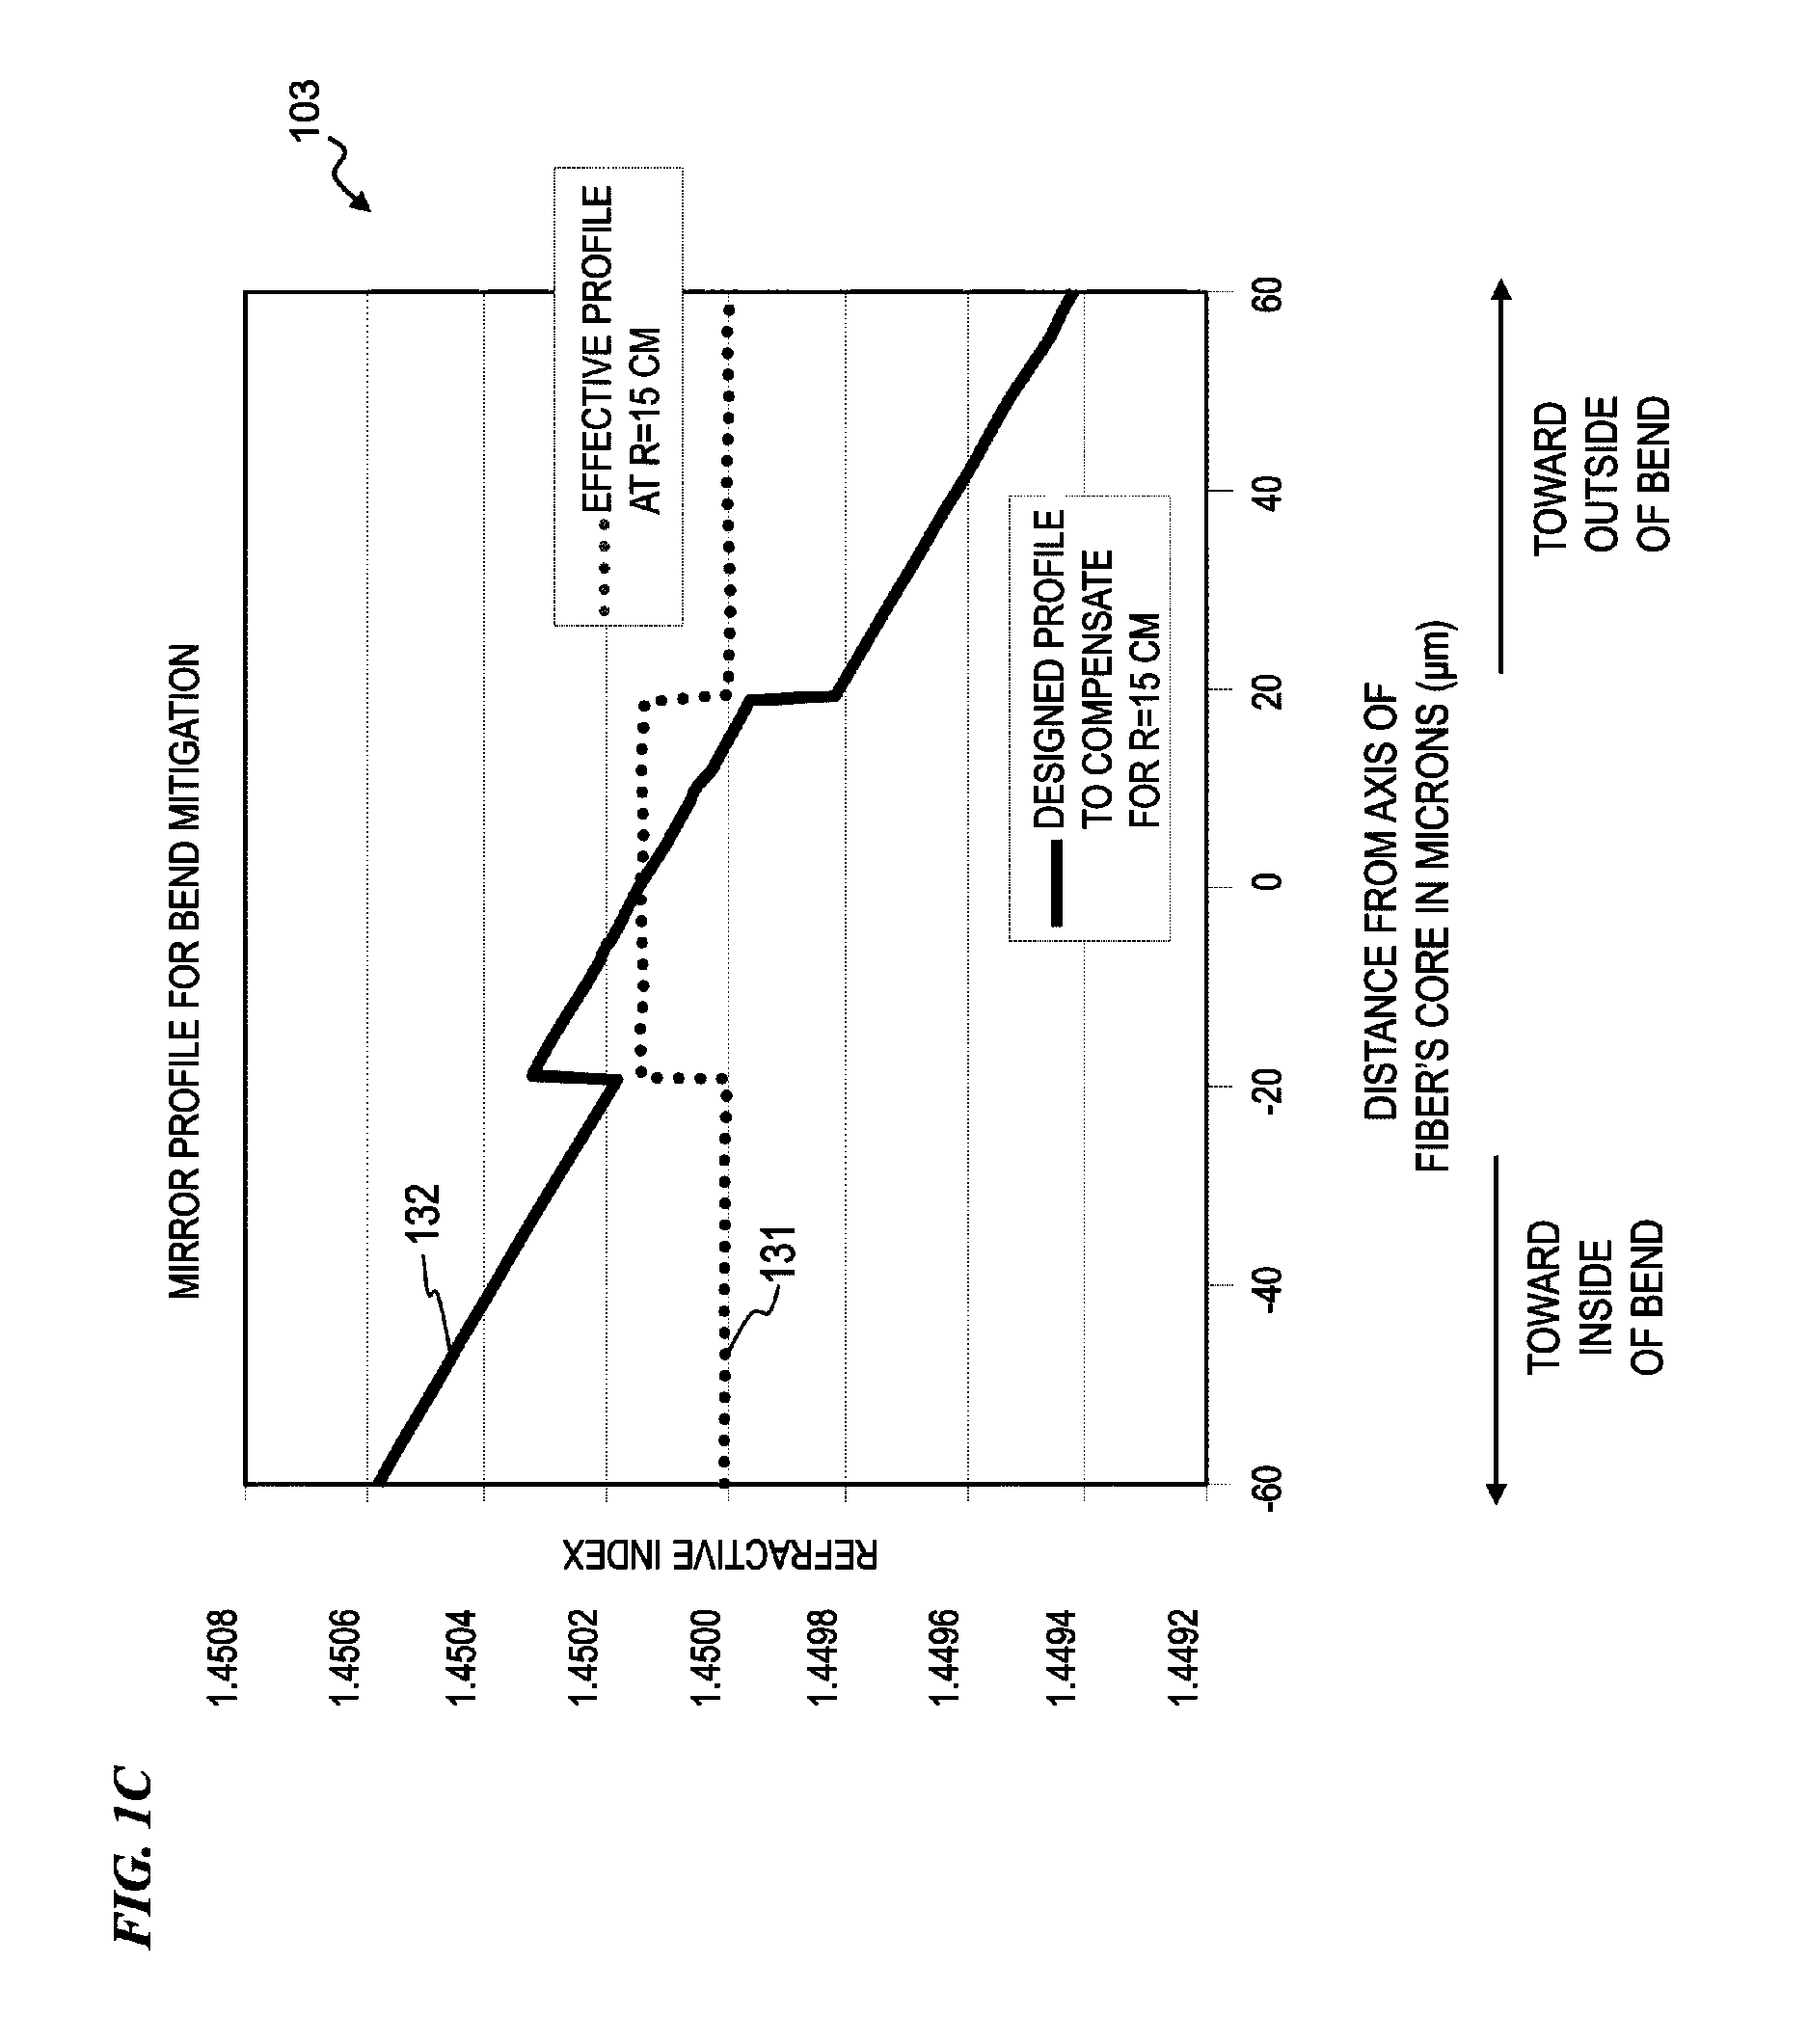 Apparatus and method for compensating for and using mode-profile distortions caused by bending optical fibers